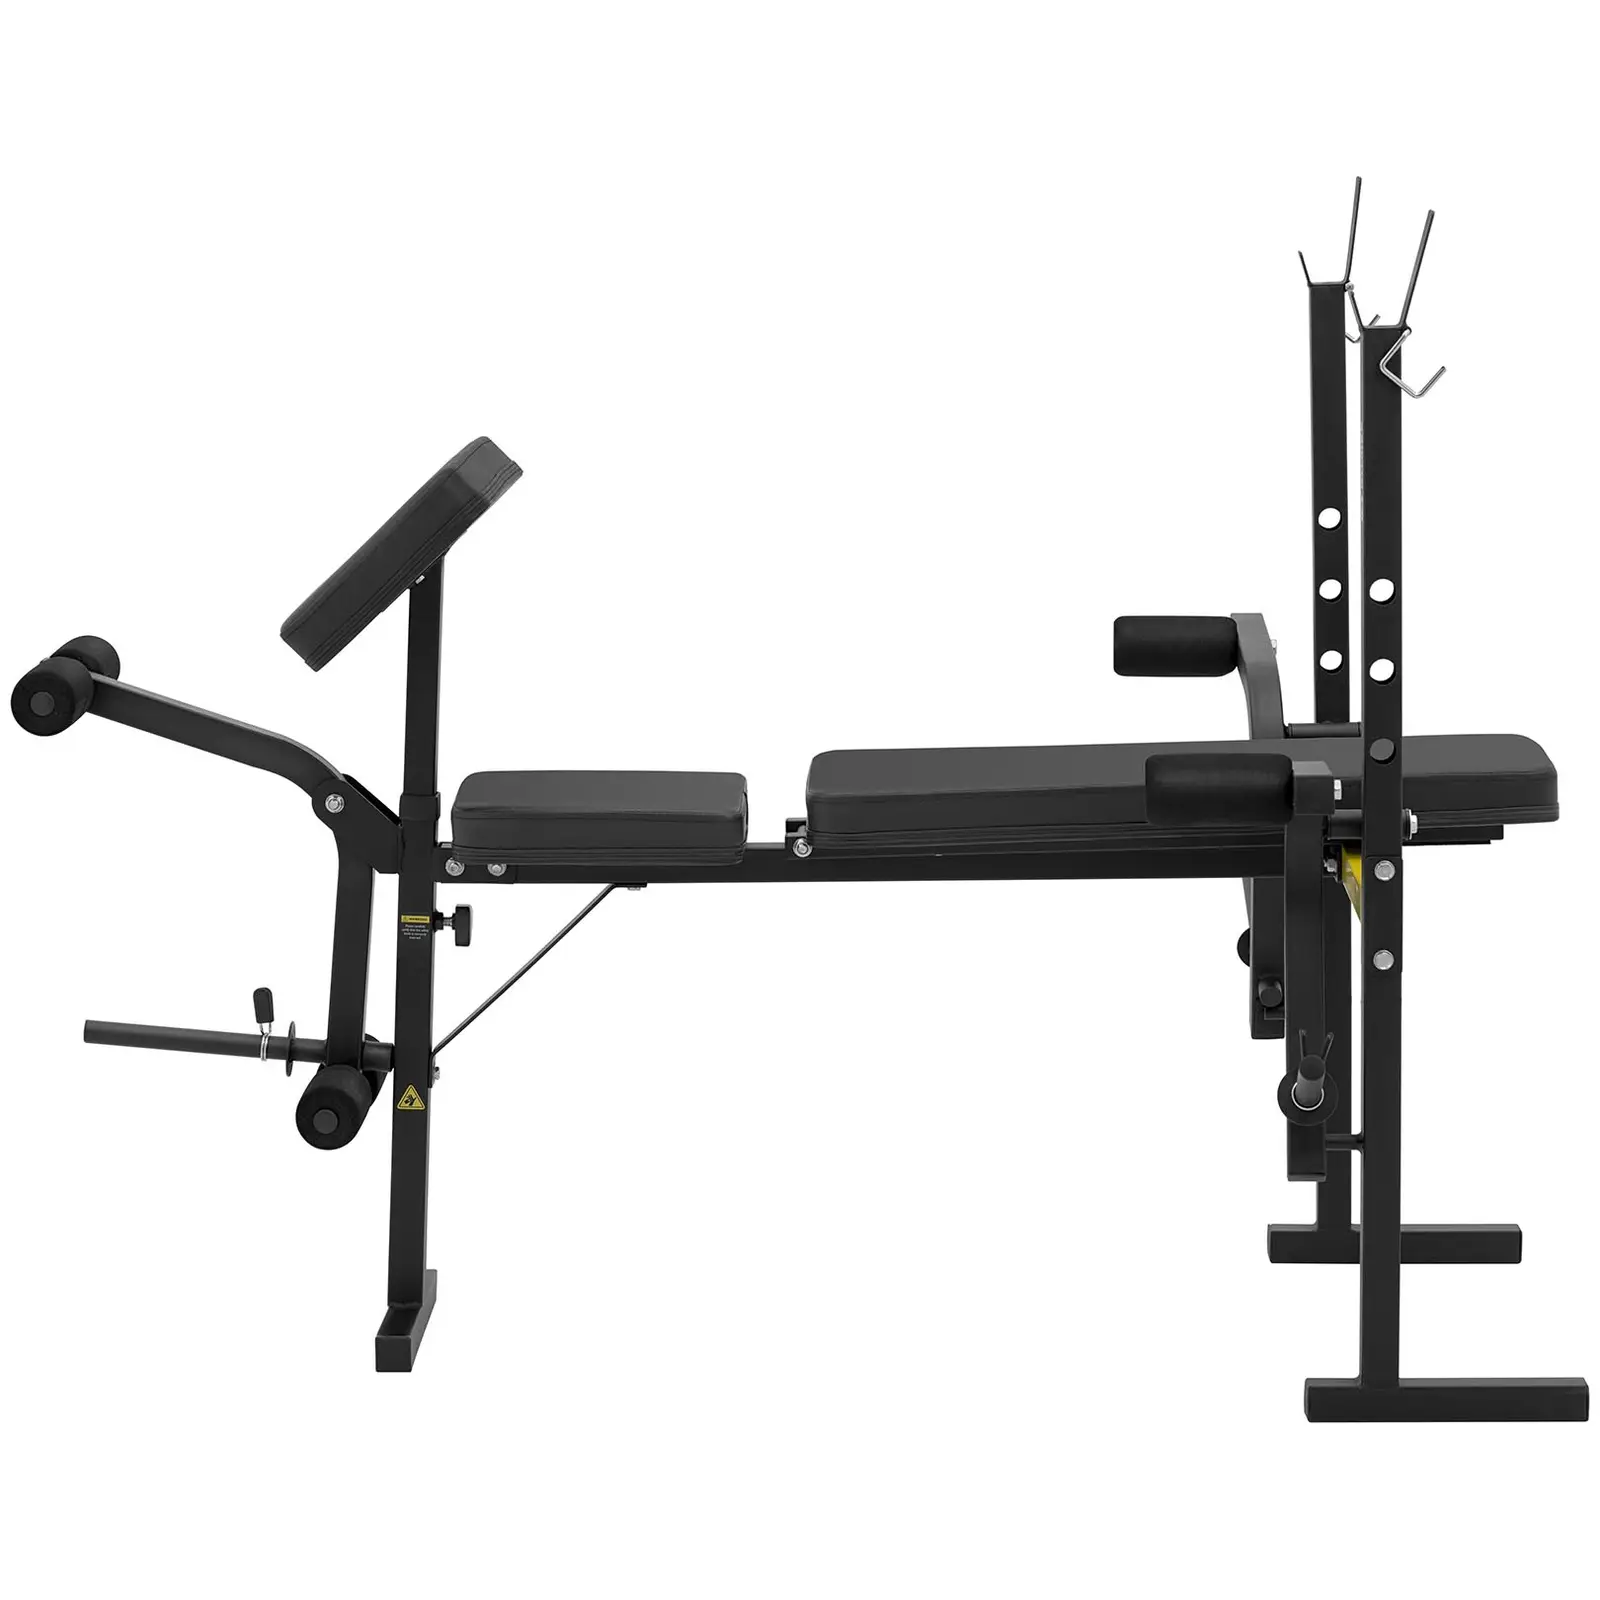 Factory second Multifunctional Weight Bench - supports up to 100 kg - adjustable